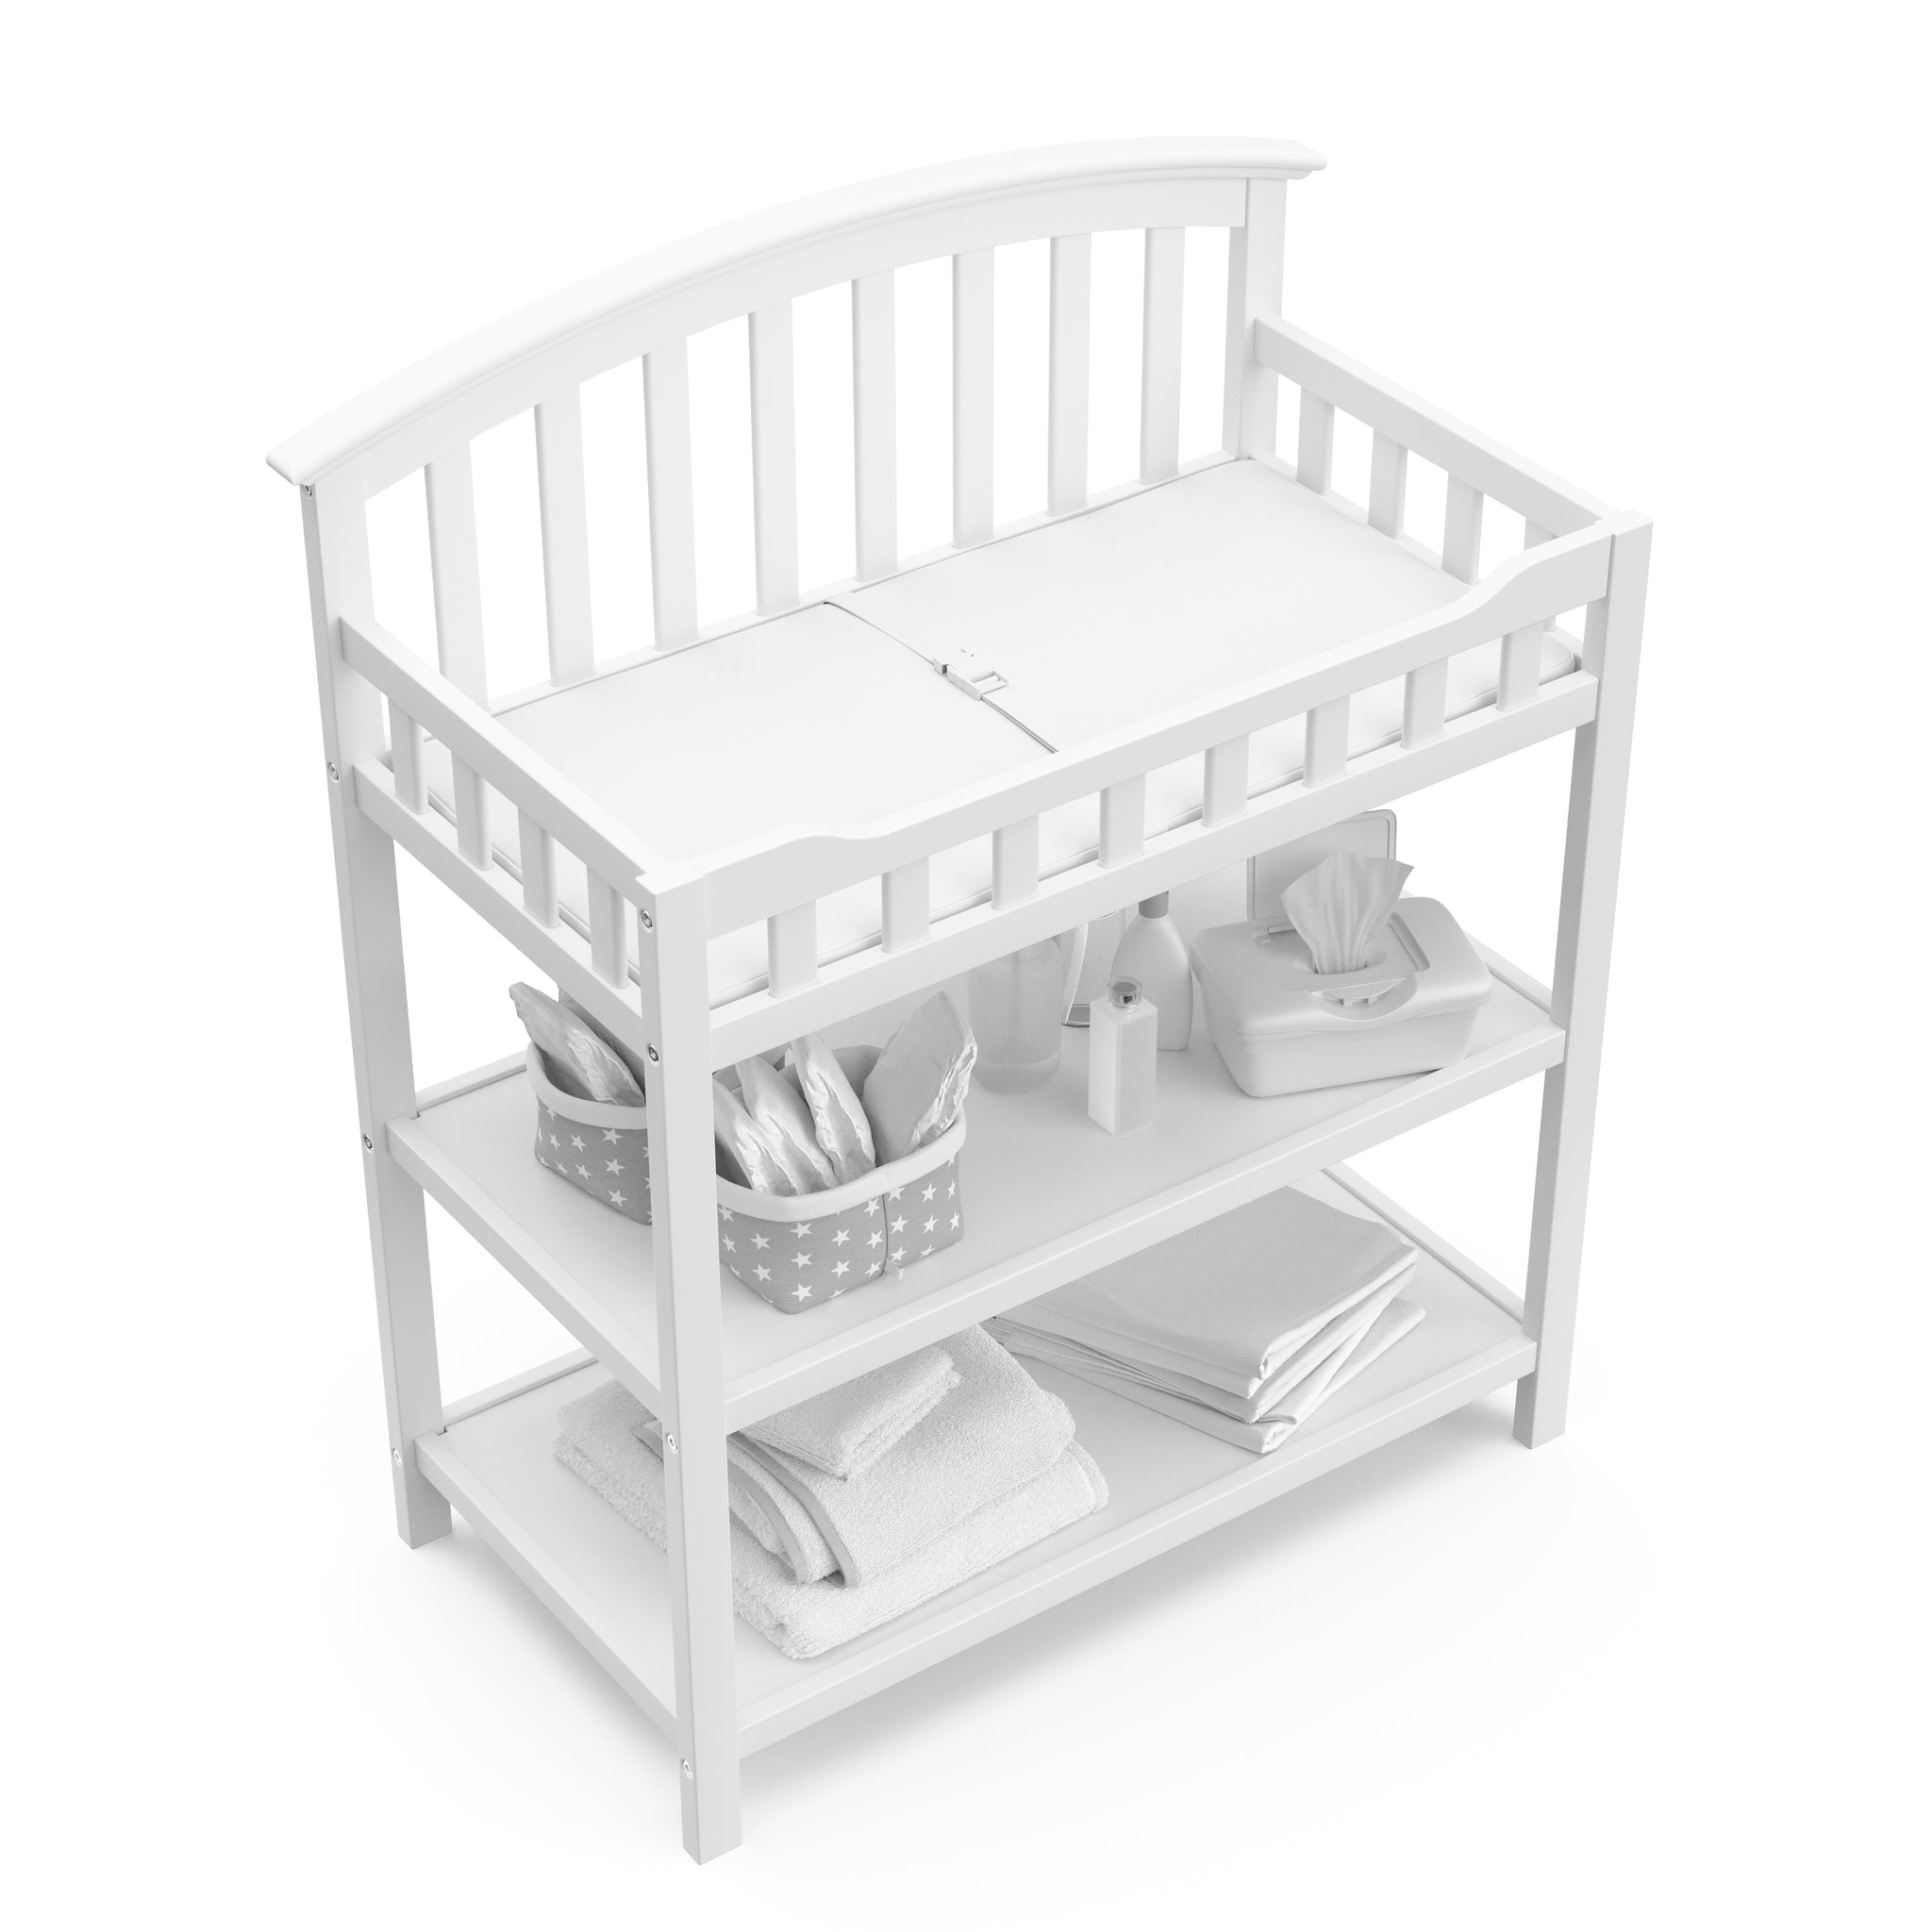 Bird’s-eye view of white changing table with two open shelves